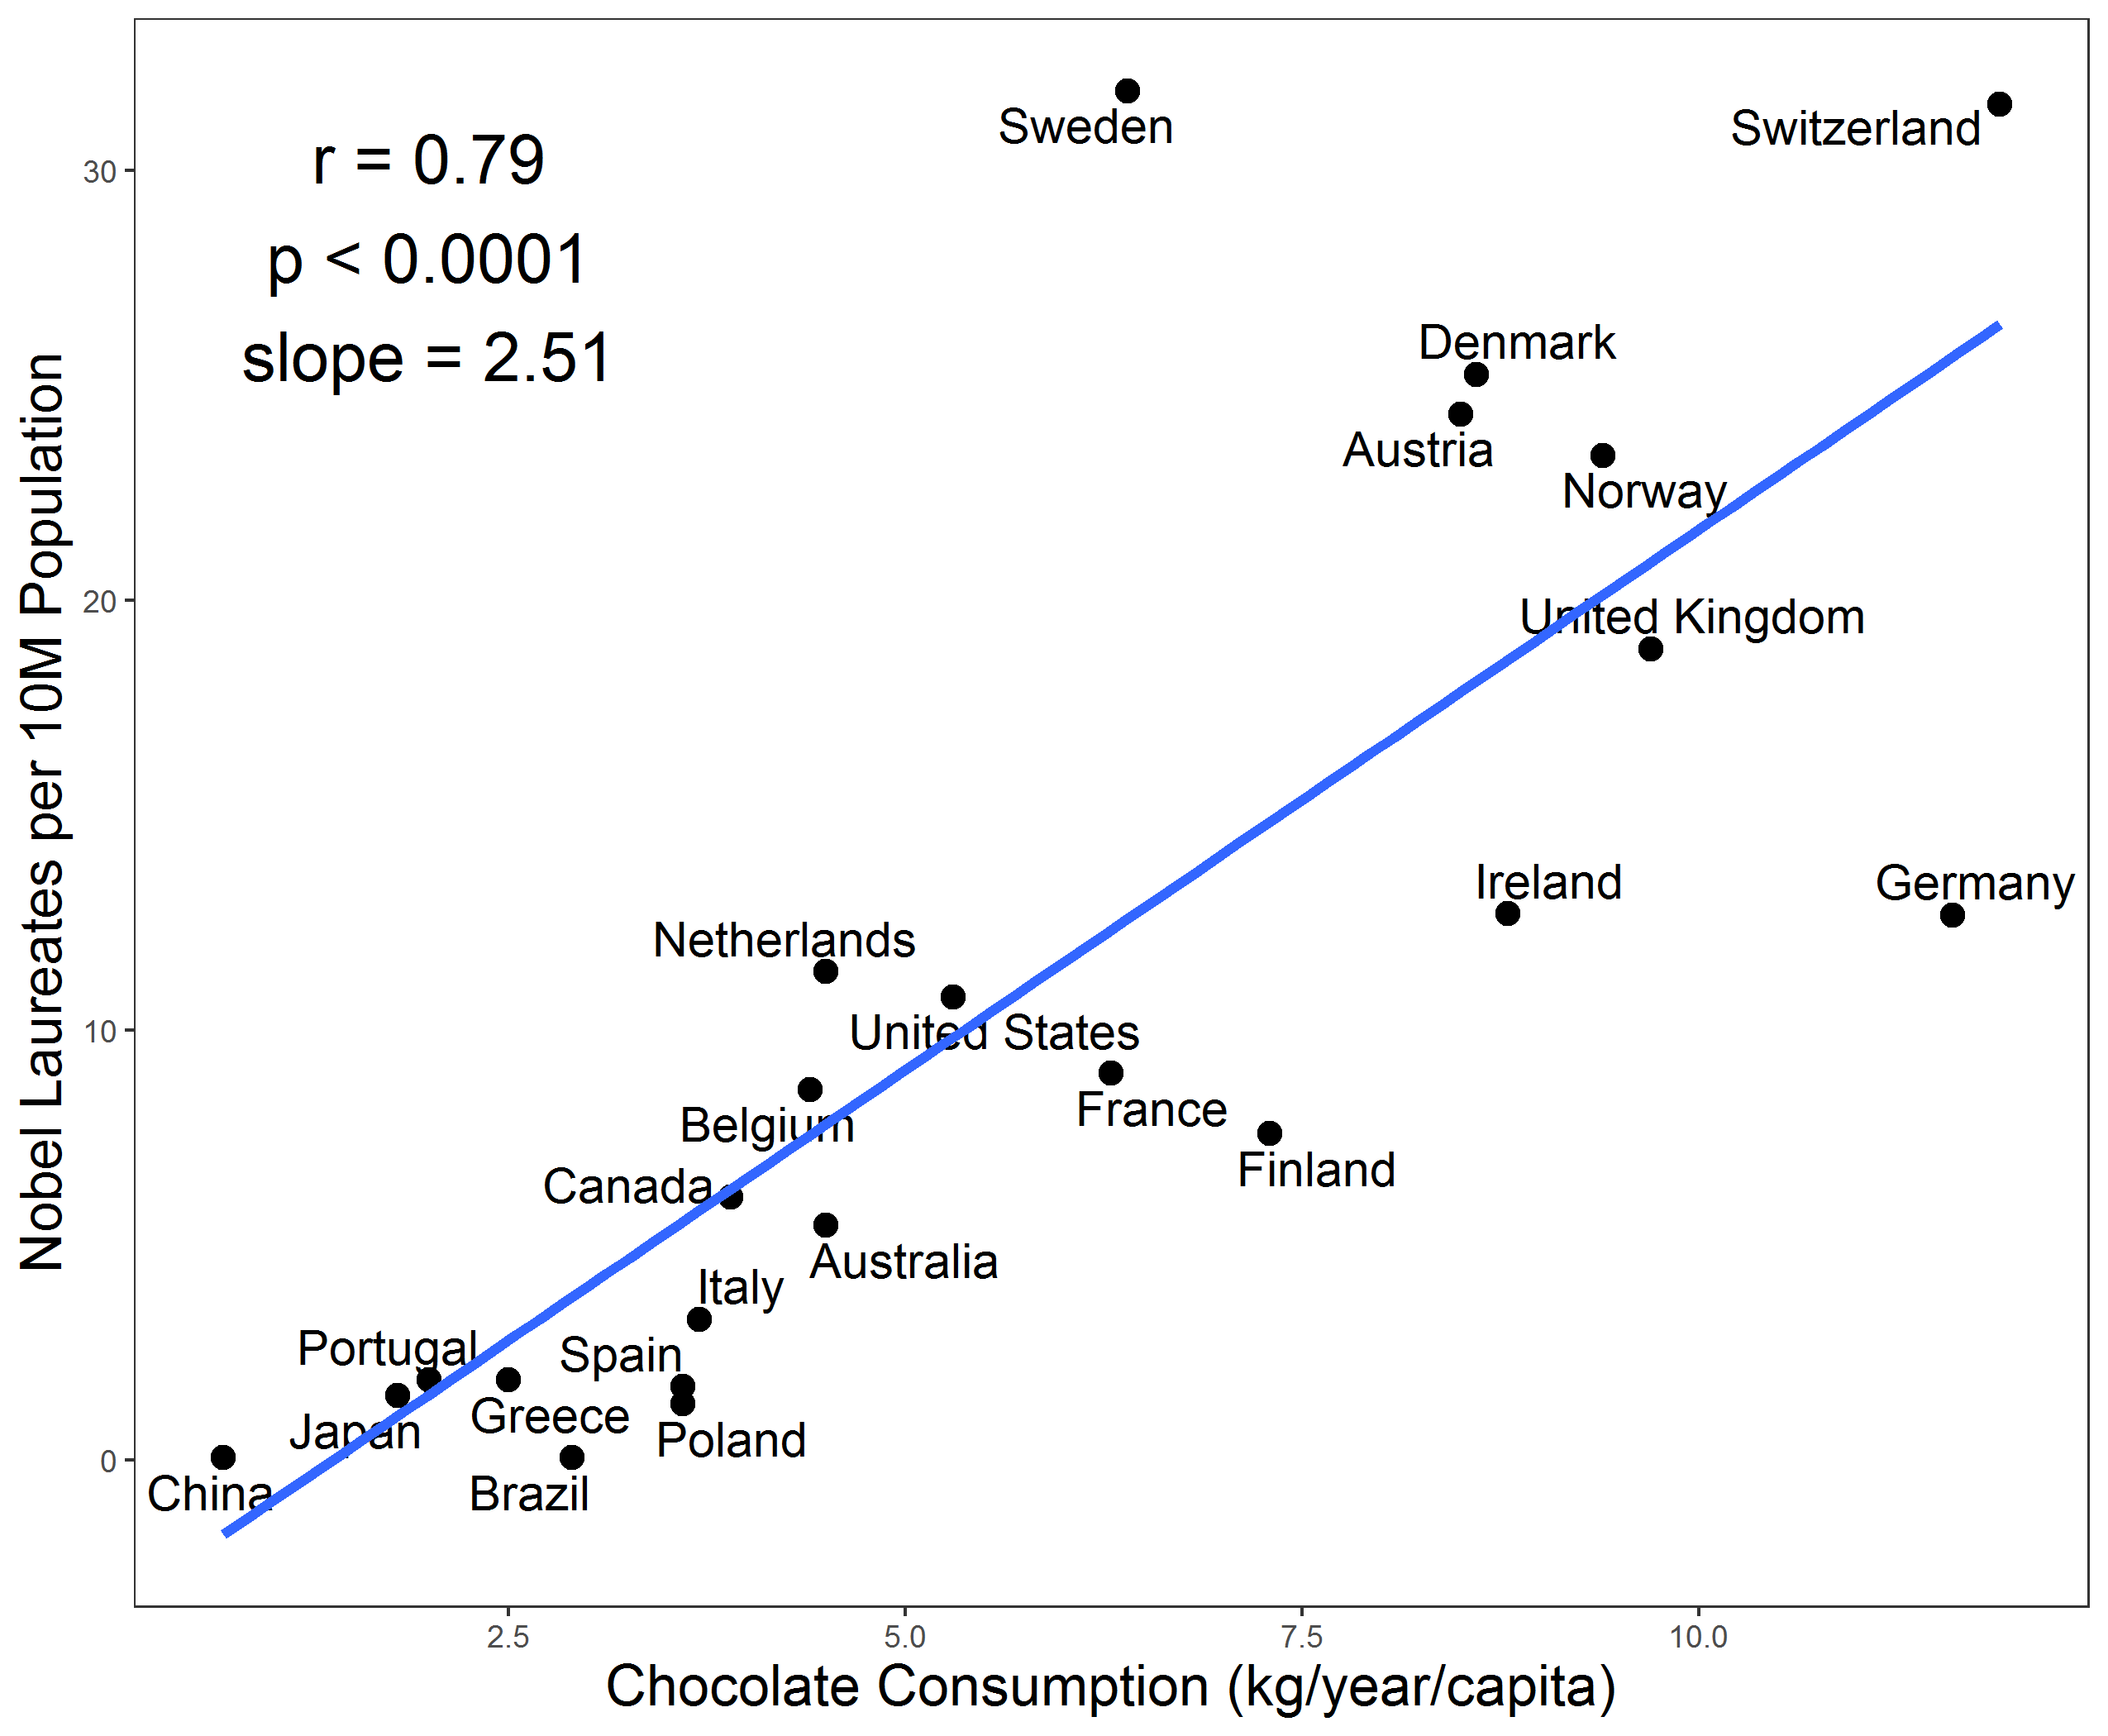 A spurious correlation: Chocolate consumption per capita and the number of Nobel prizes per million population in twenty-three countries.